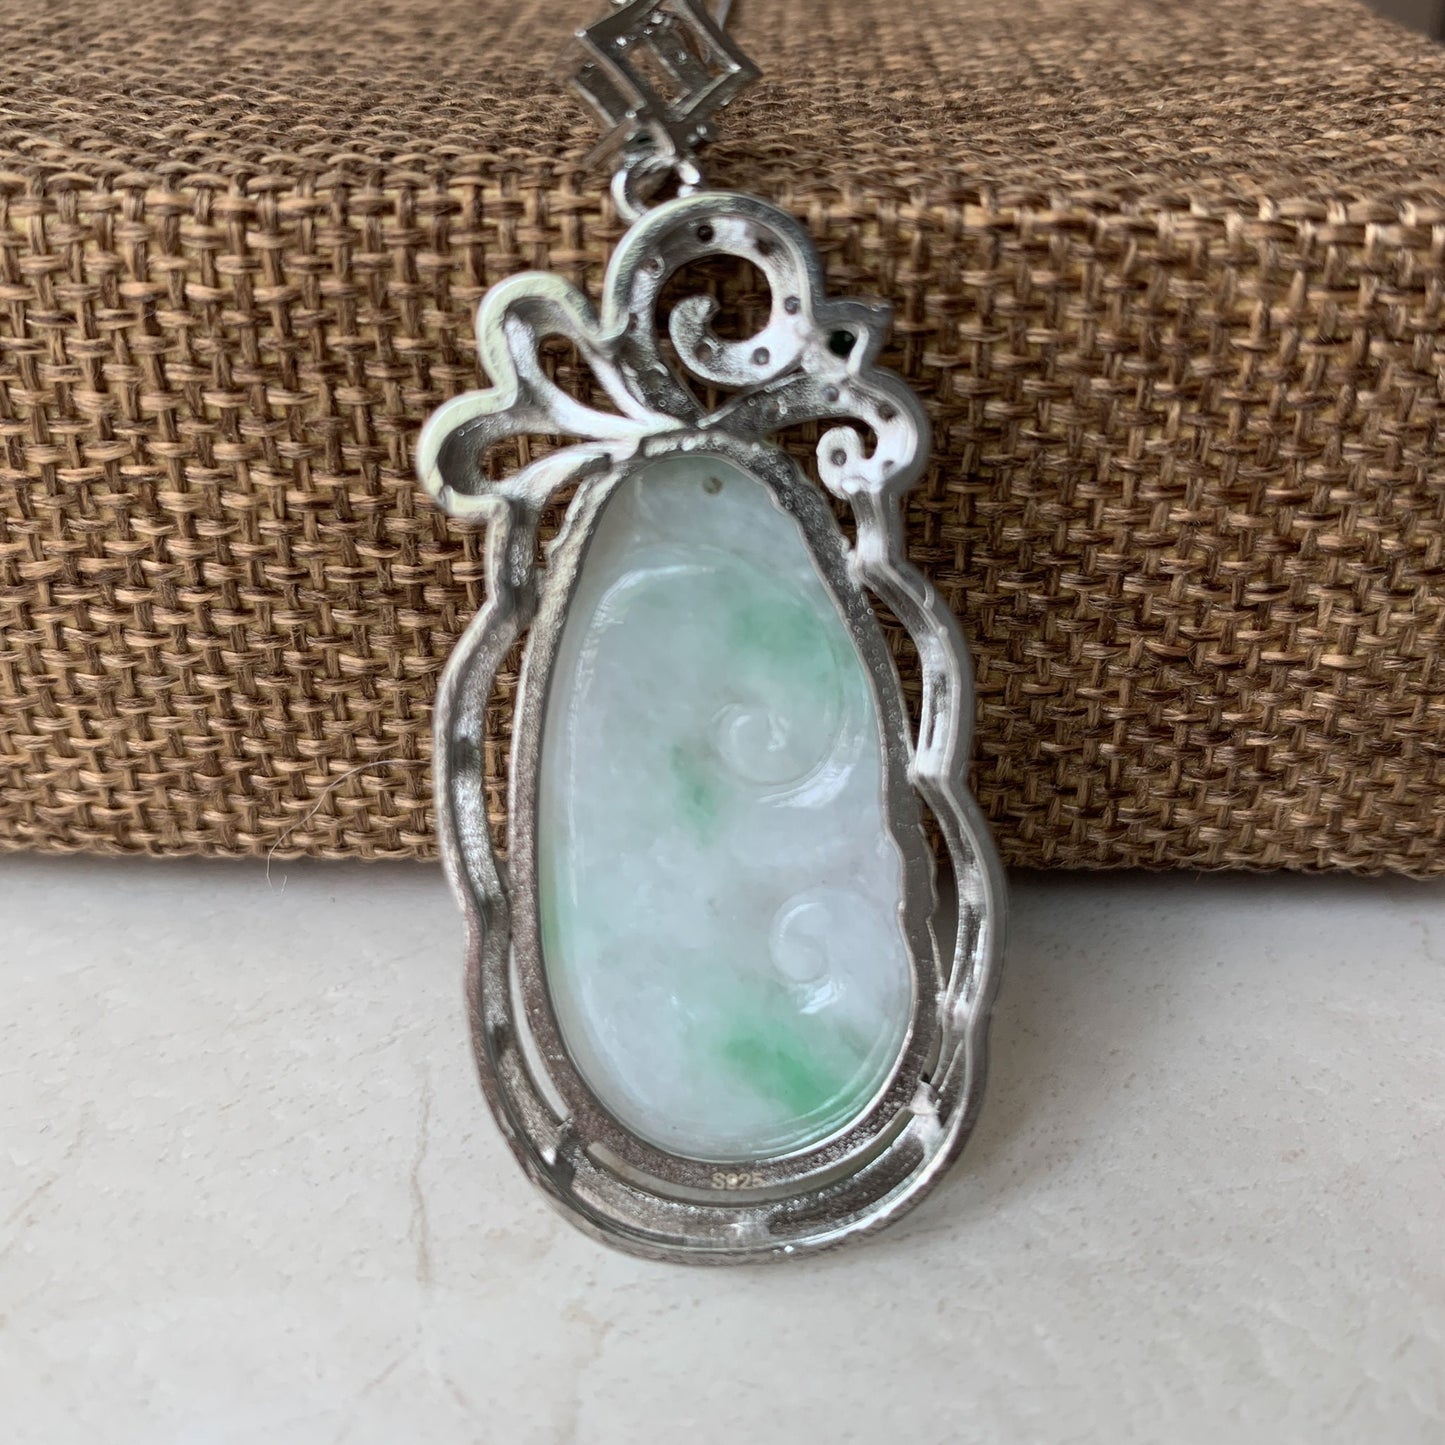 Jadeite Jade Lucky Ruyi Ru Yi, 如意, Sterling Silver Pendant Hand Carved Necklace, BJ-0621-0003439-3 - AriaDesignCollection